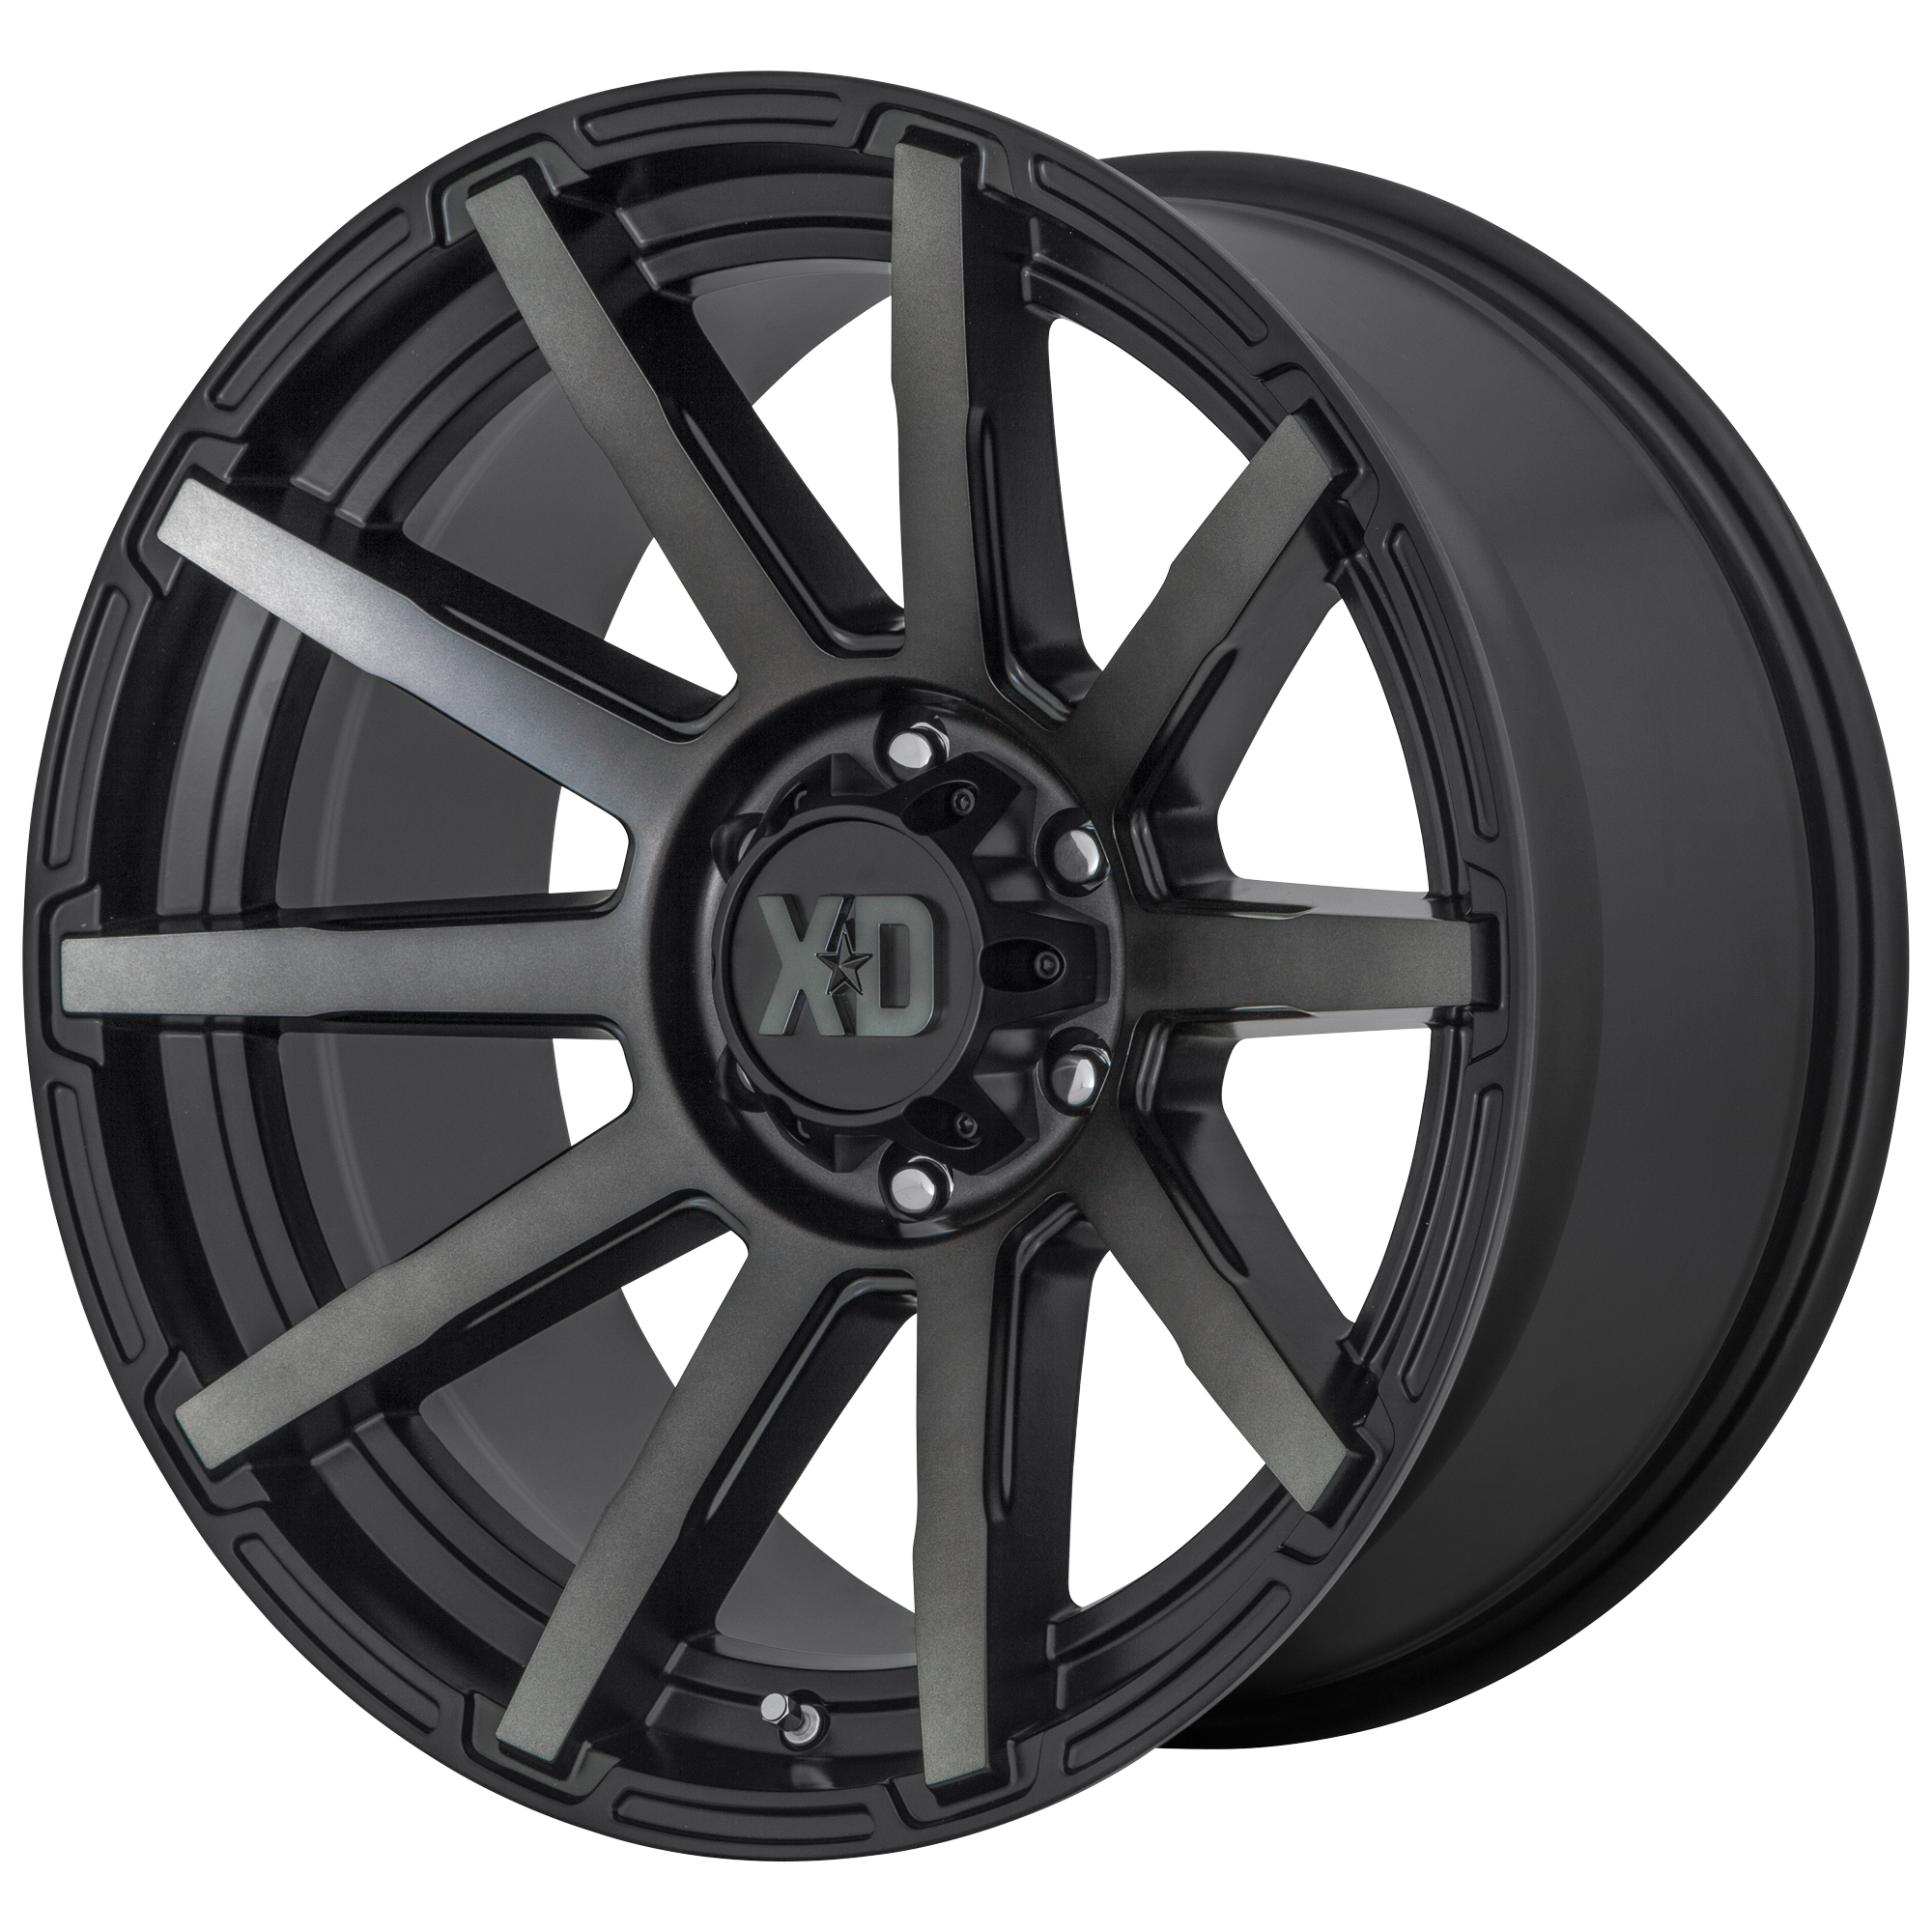 OUTBREAK 18x9 5x150.00 SATIN BLACK W/ GRAY TINT (0 mm) - Tires and Engine Performance